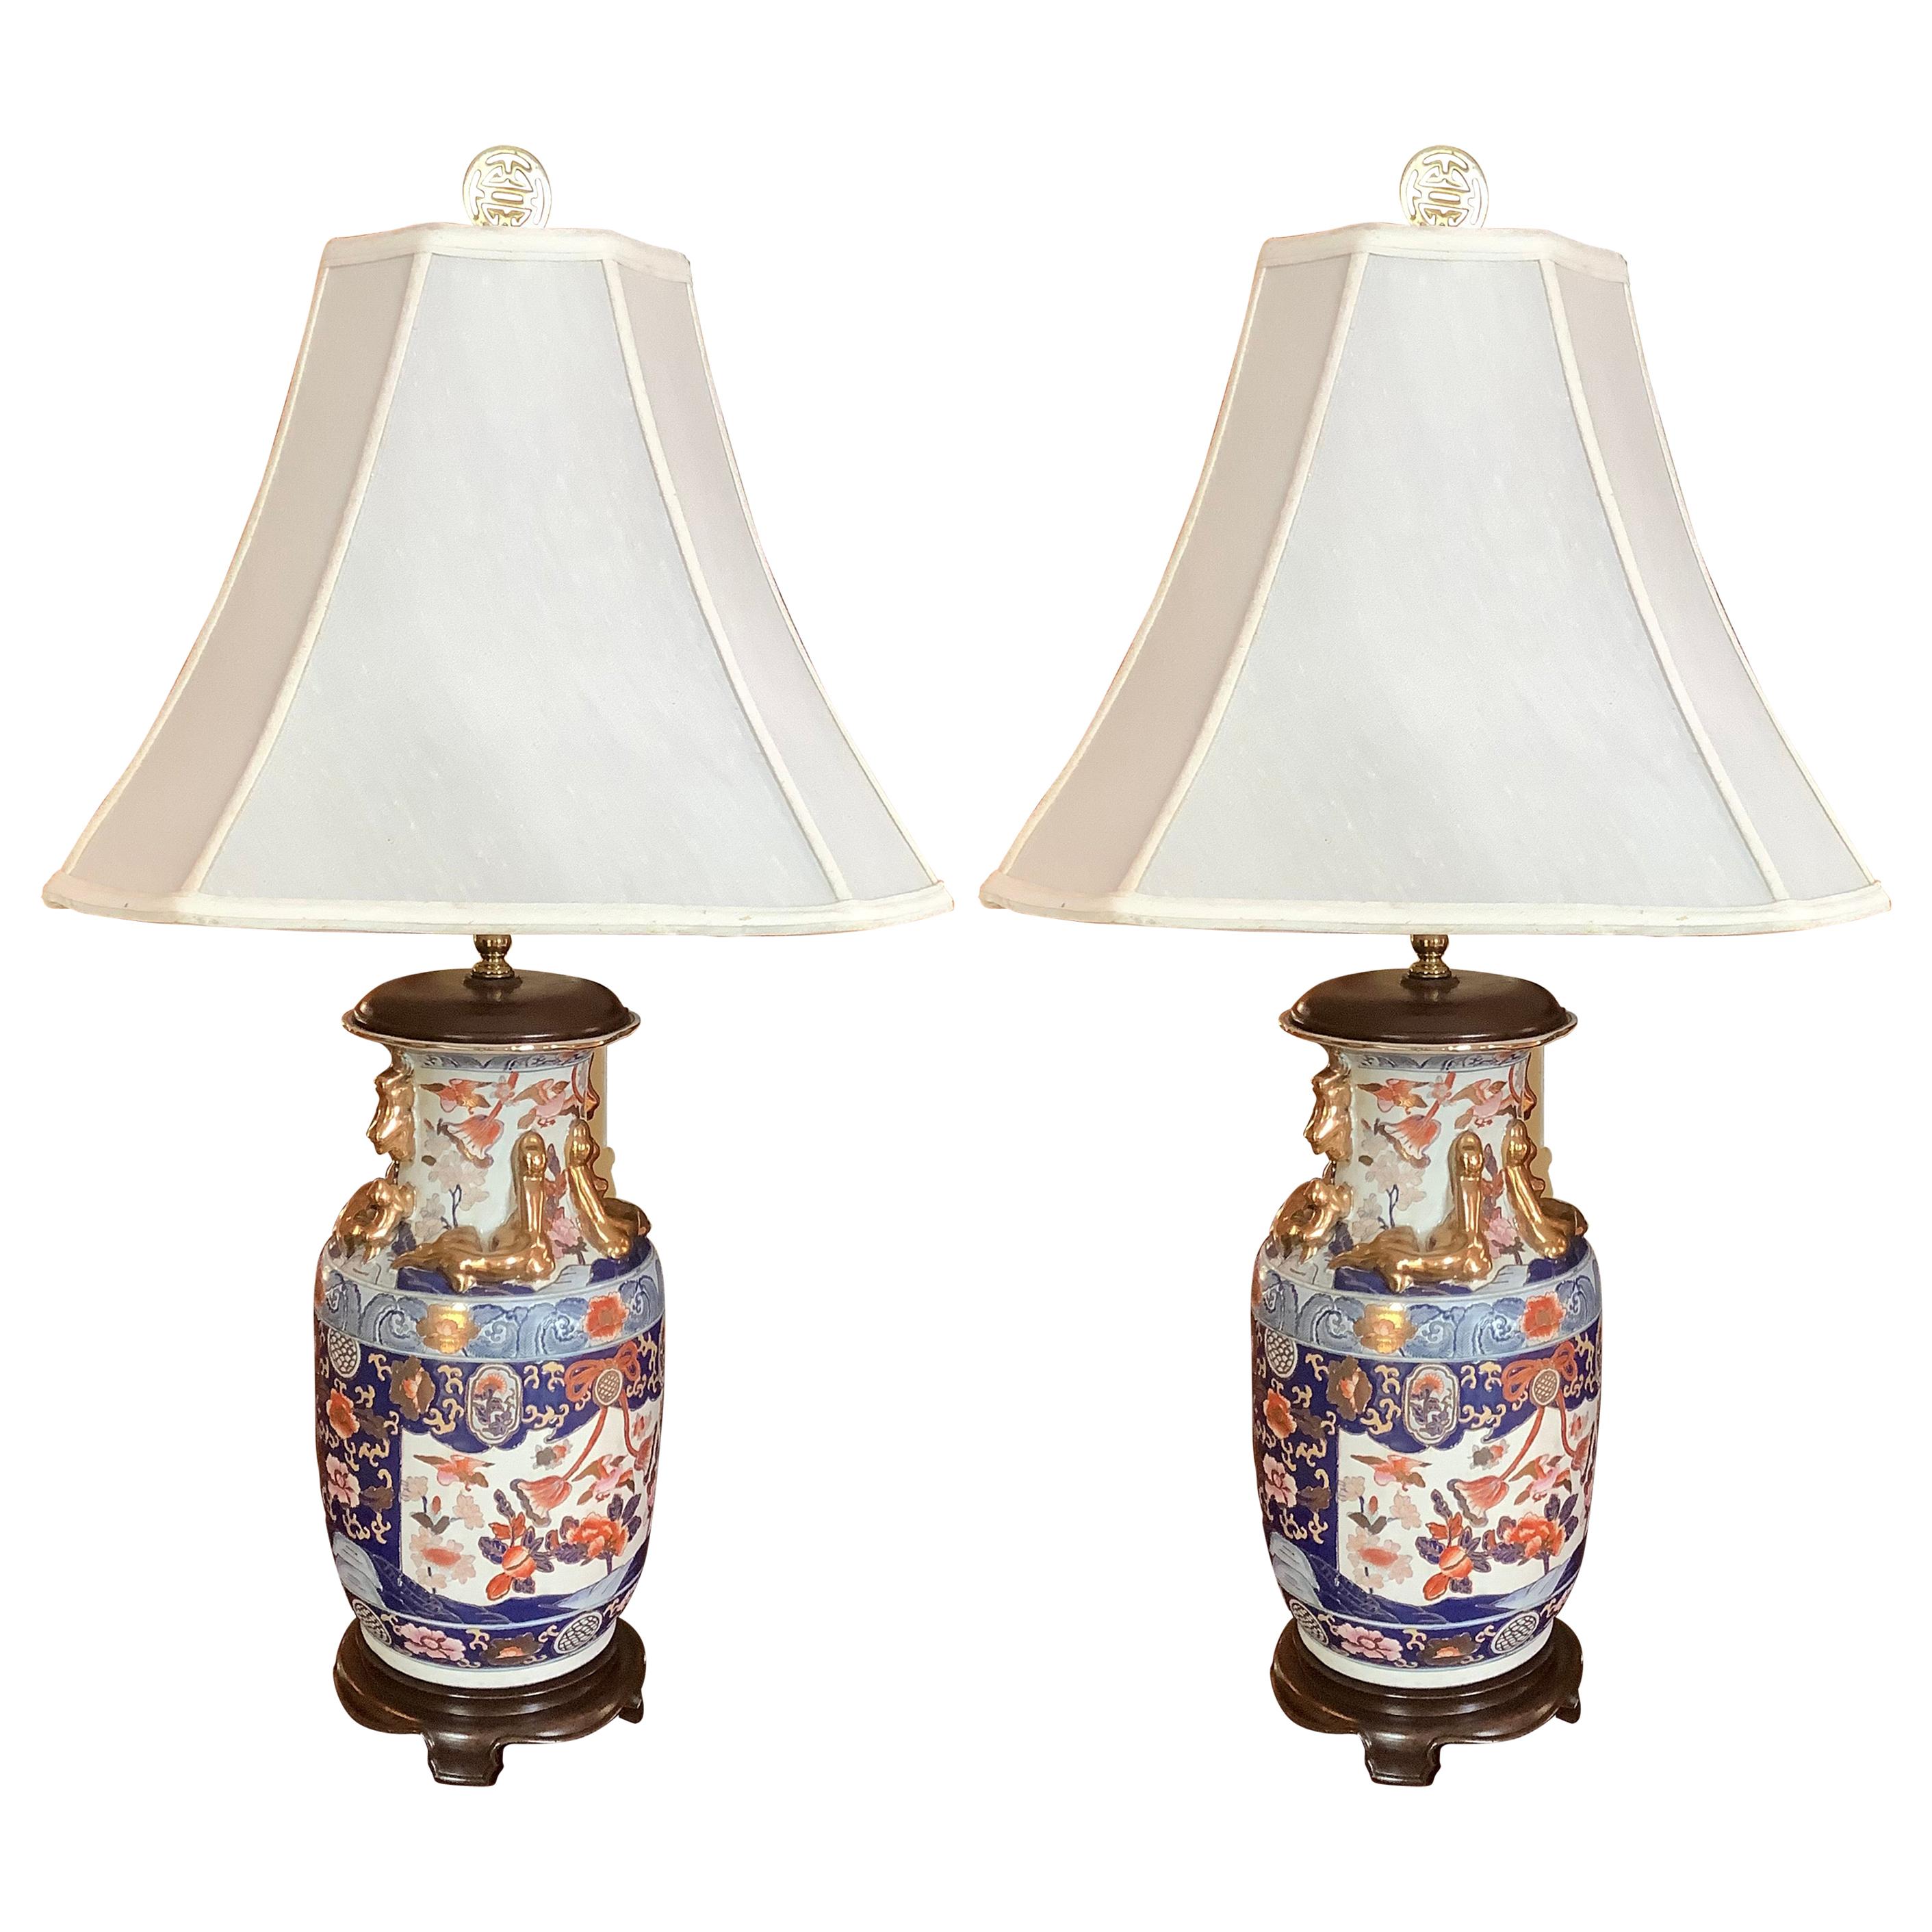 Pair of Imari Style Lamps on Wood Bases, 20th Century